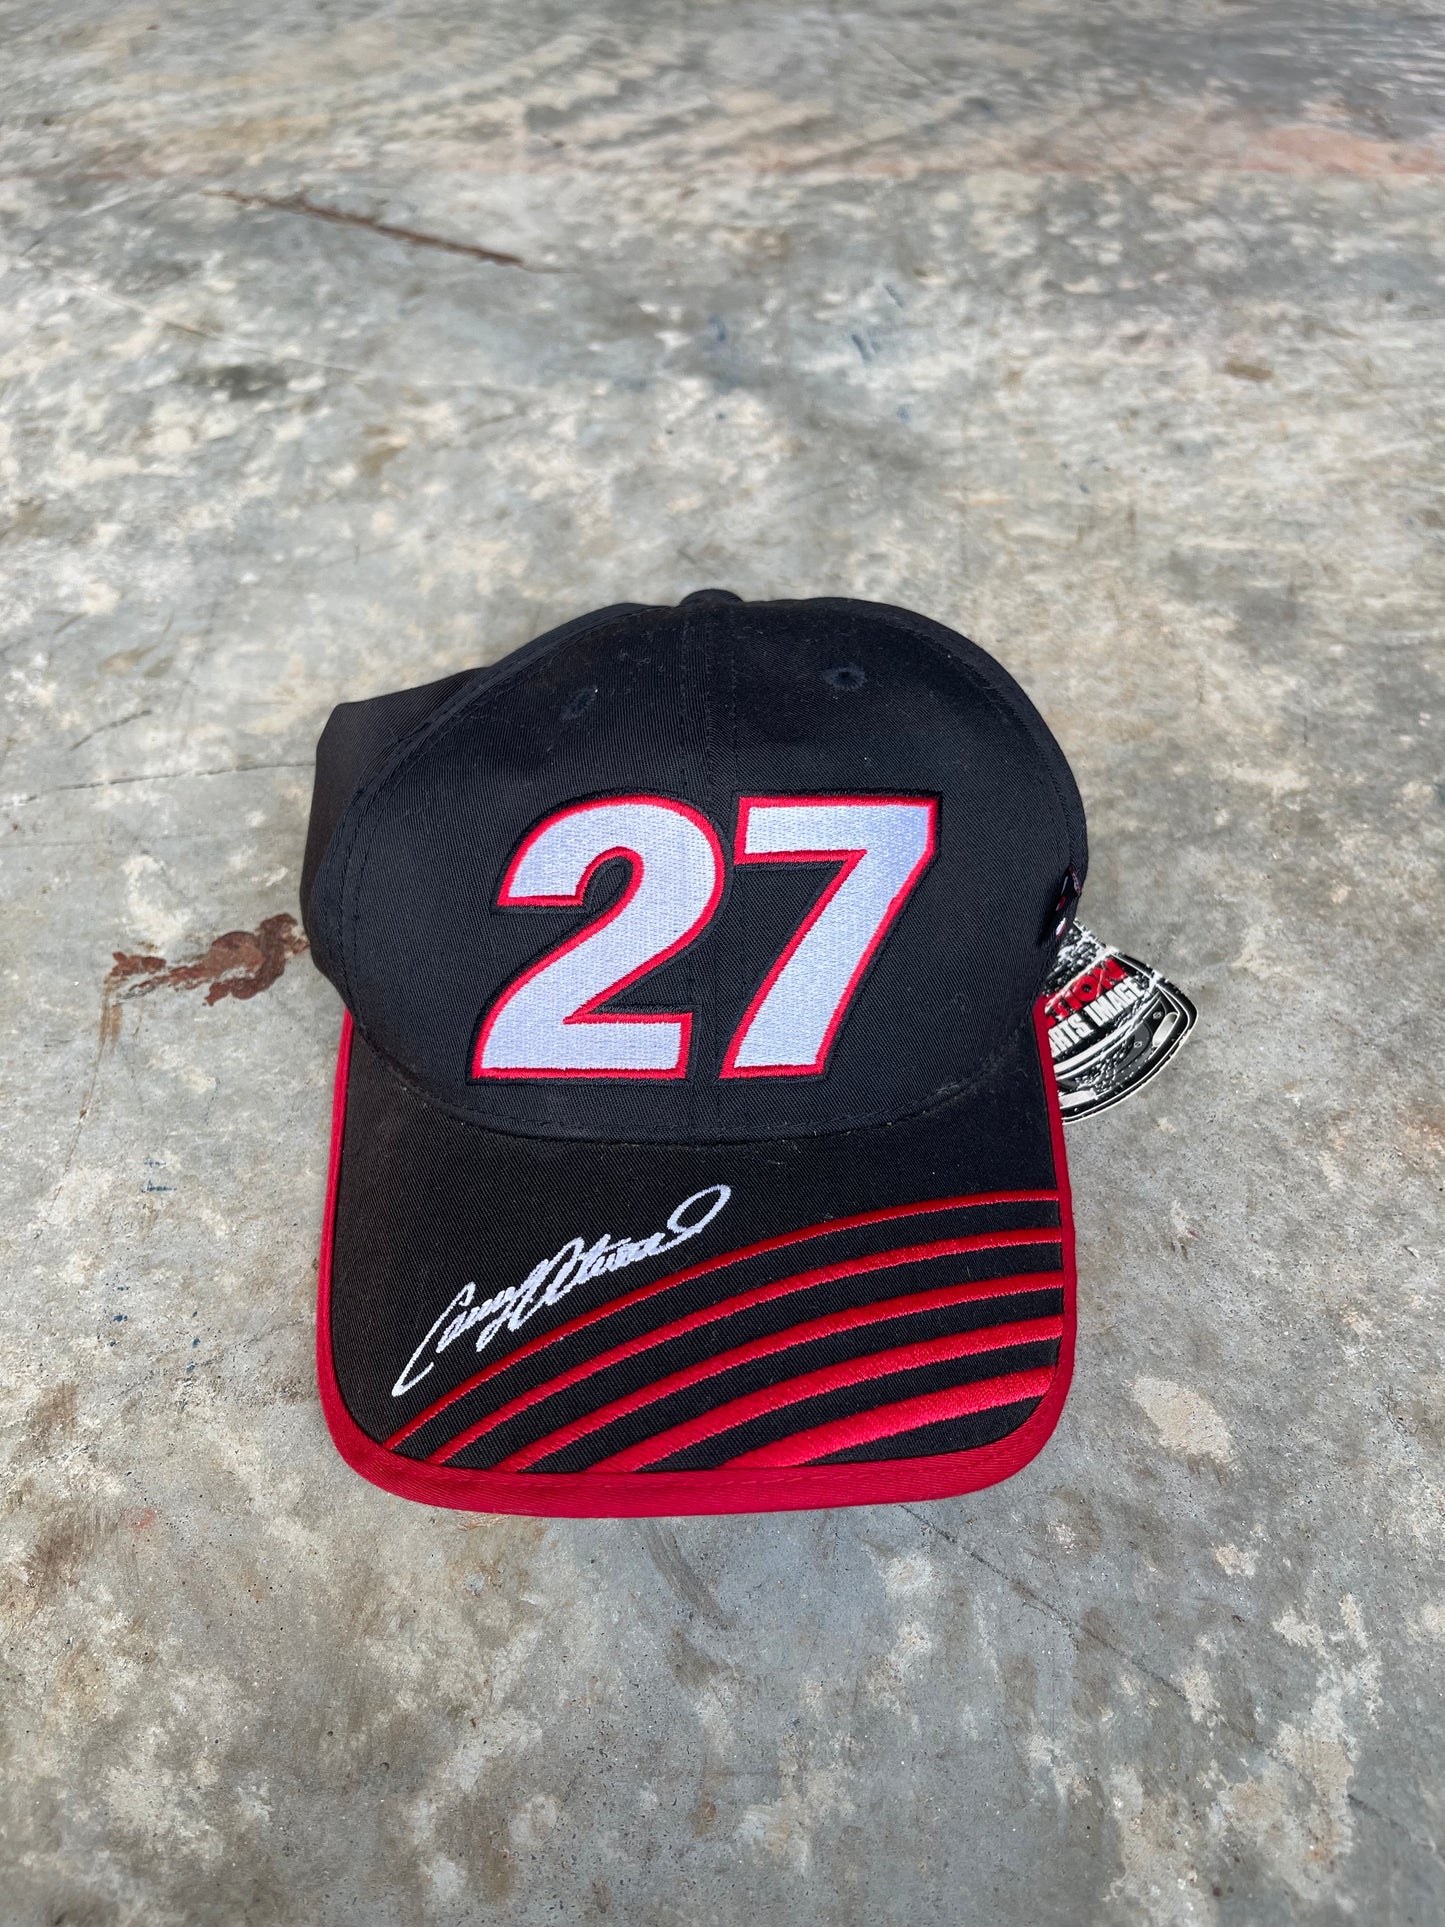 Casey Atwood Racing Hat